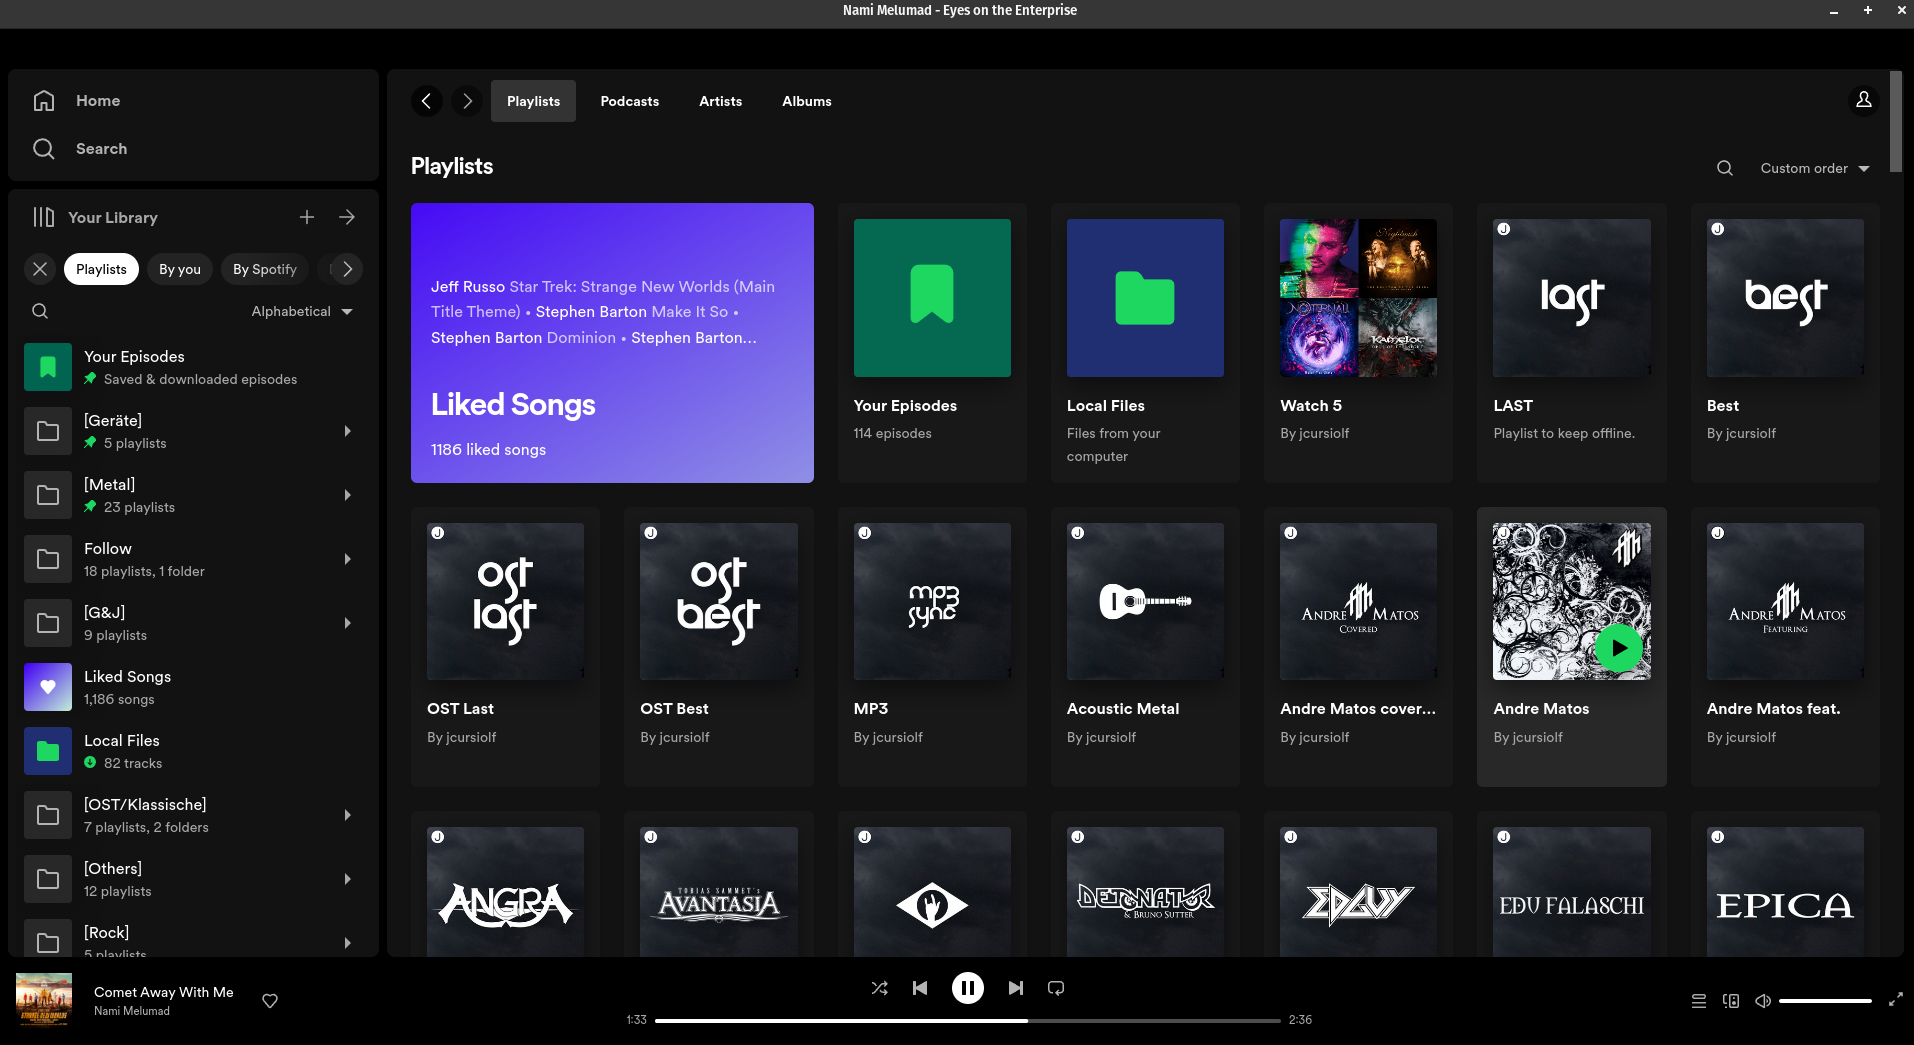 Spotify's Desktop Experience Gets a Brand-New Look With Redesigned